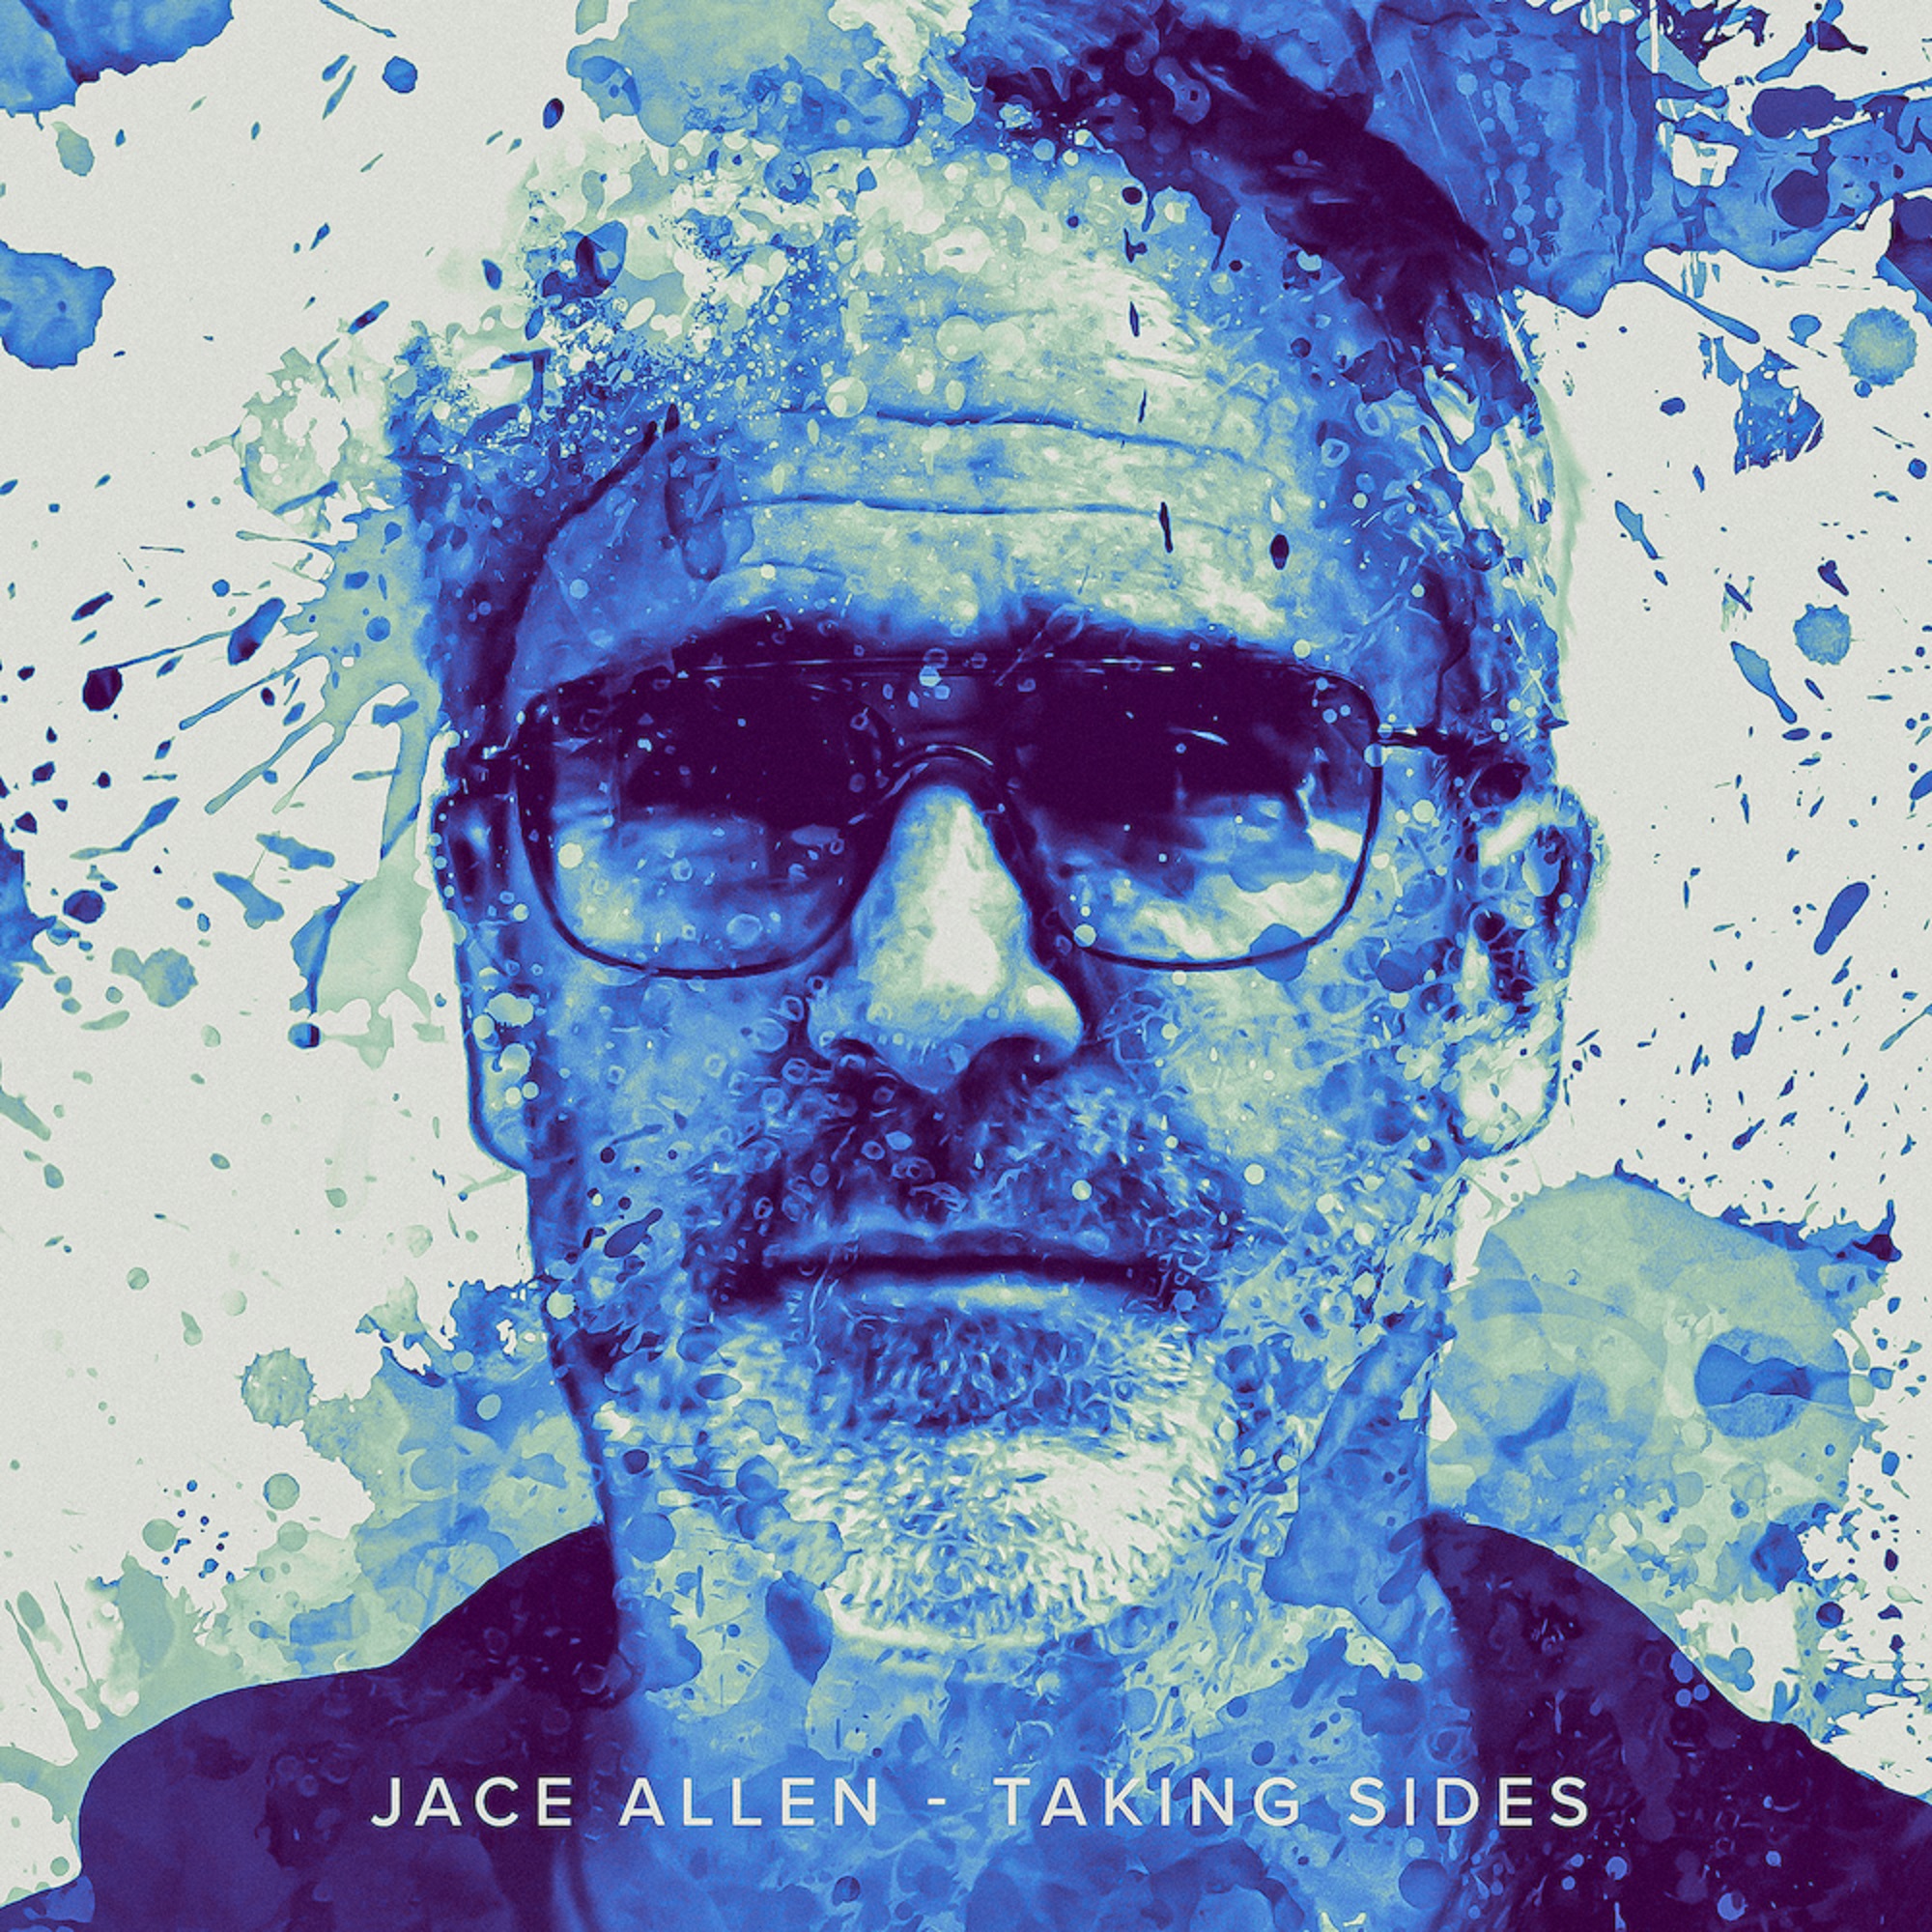 Jace Allen shares debut LP 'Taking Sides' & new single + video benefiting Ukrainian families: "Hail Federate"